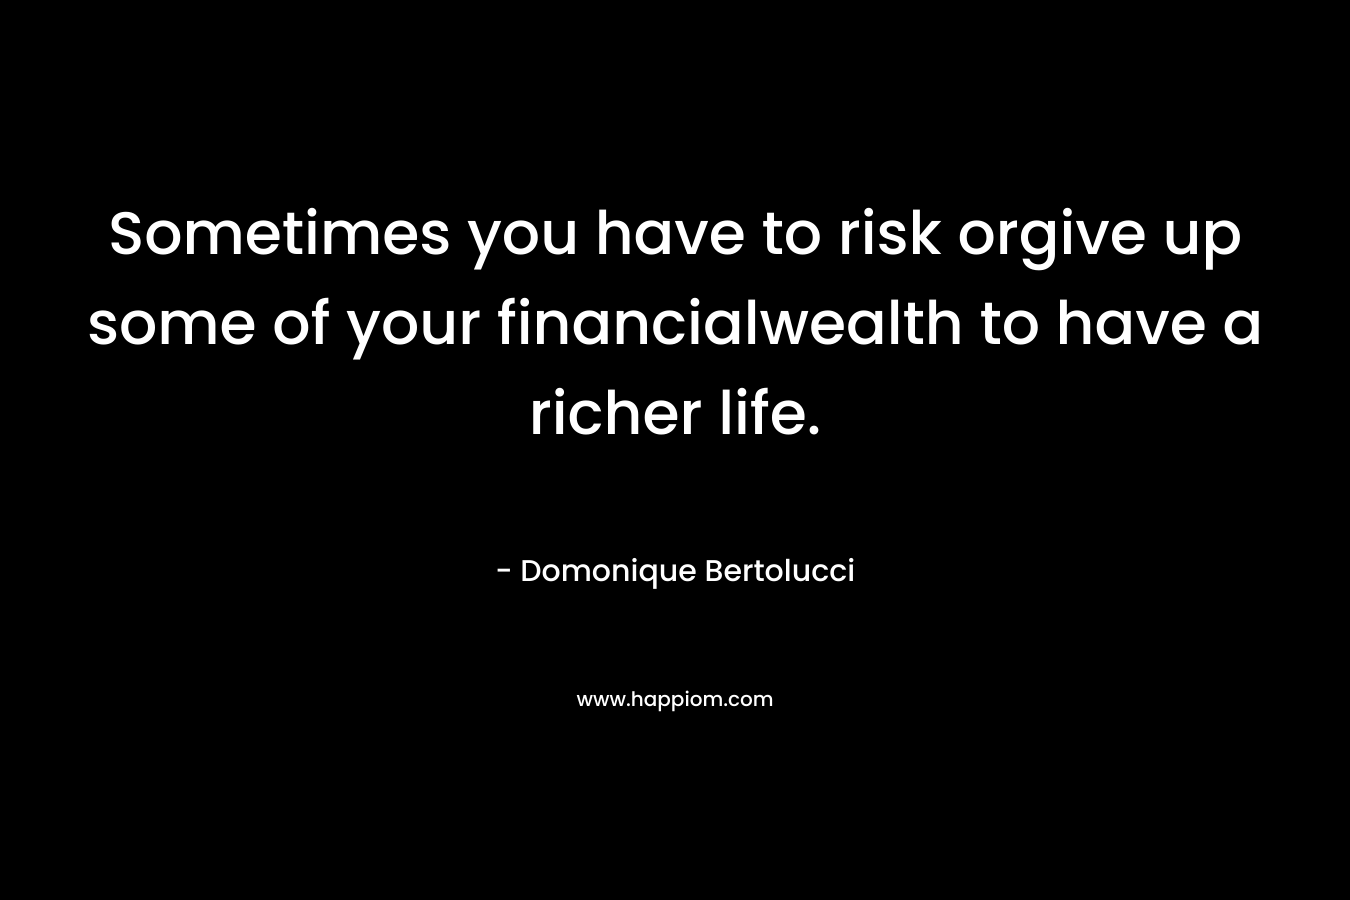 Sometimes you have to risk orgive up some of your financialwealth to have a richer life. – Domonique Bertolucci